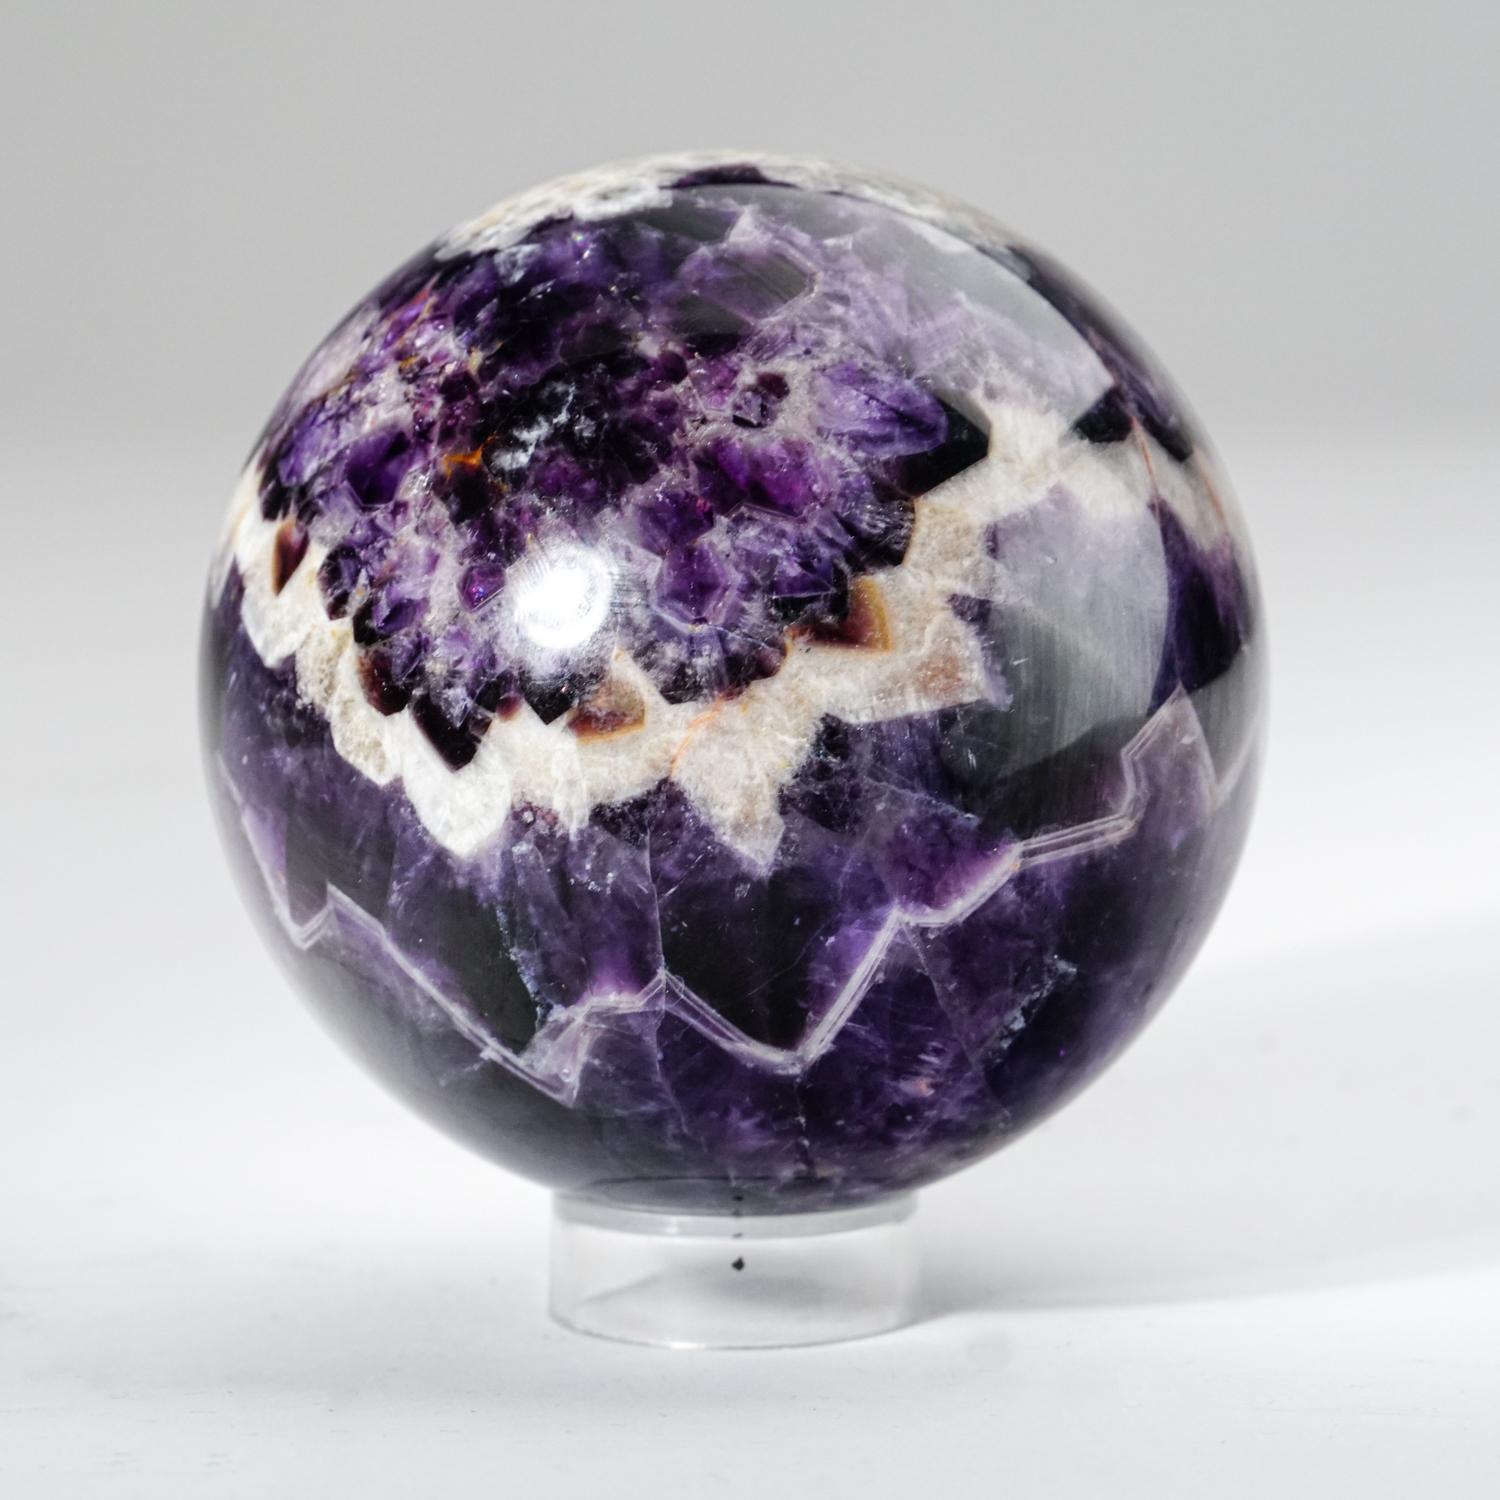 Polished Chevron Amethyst Sphere from Brazil (3.5